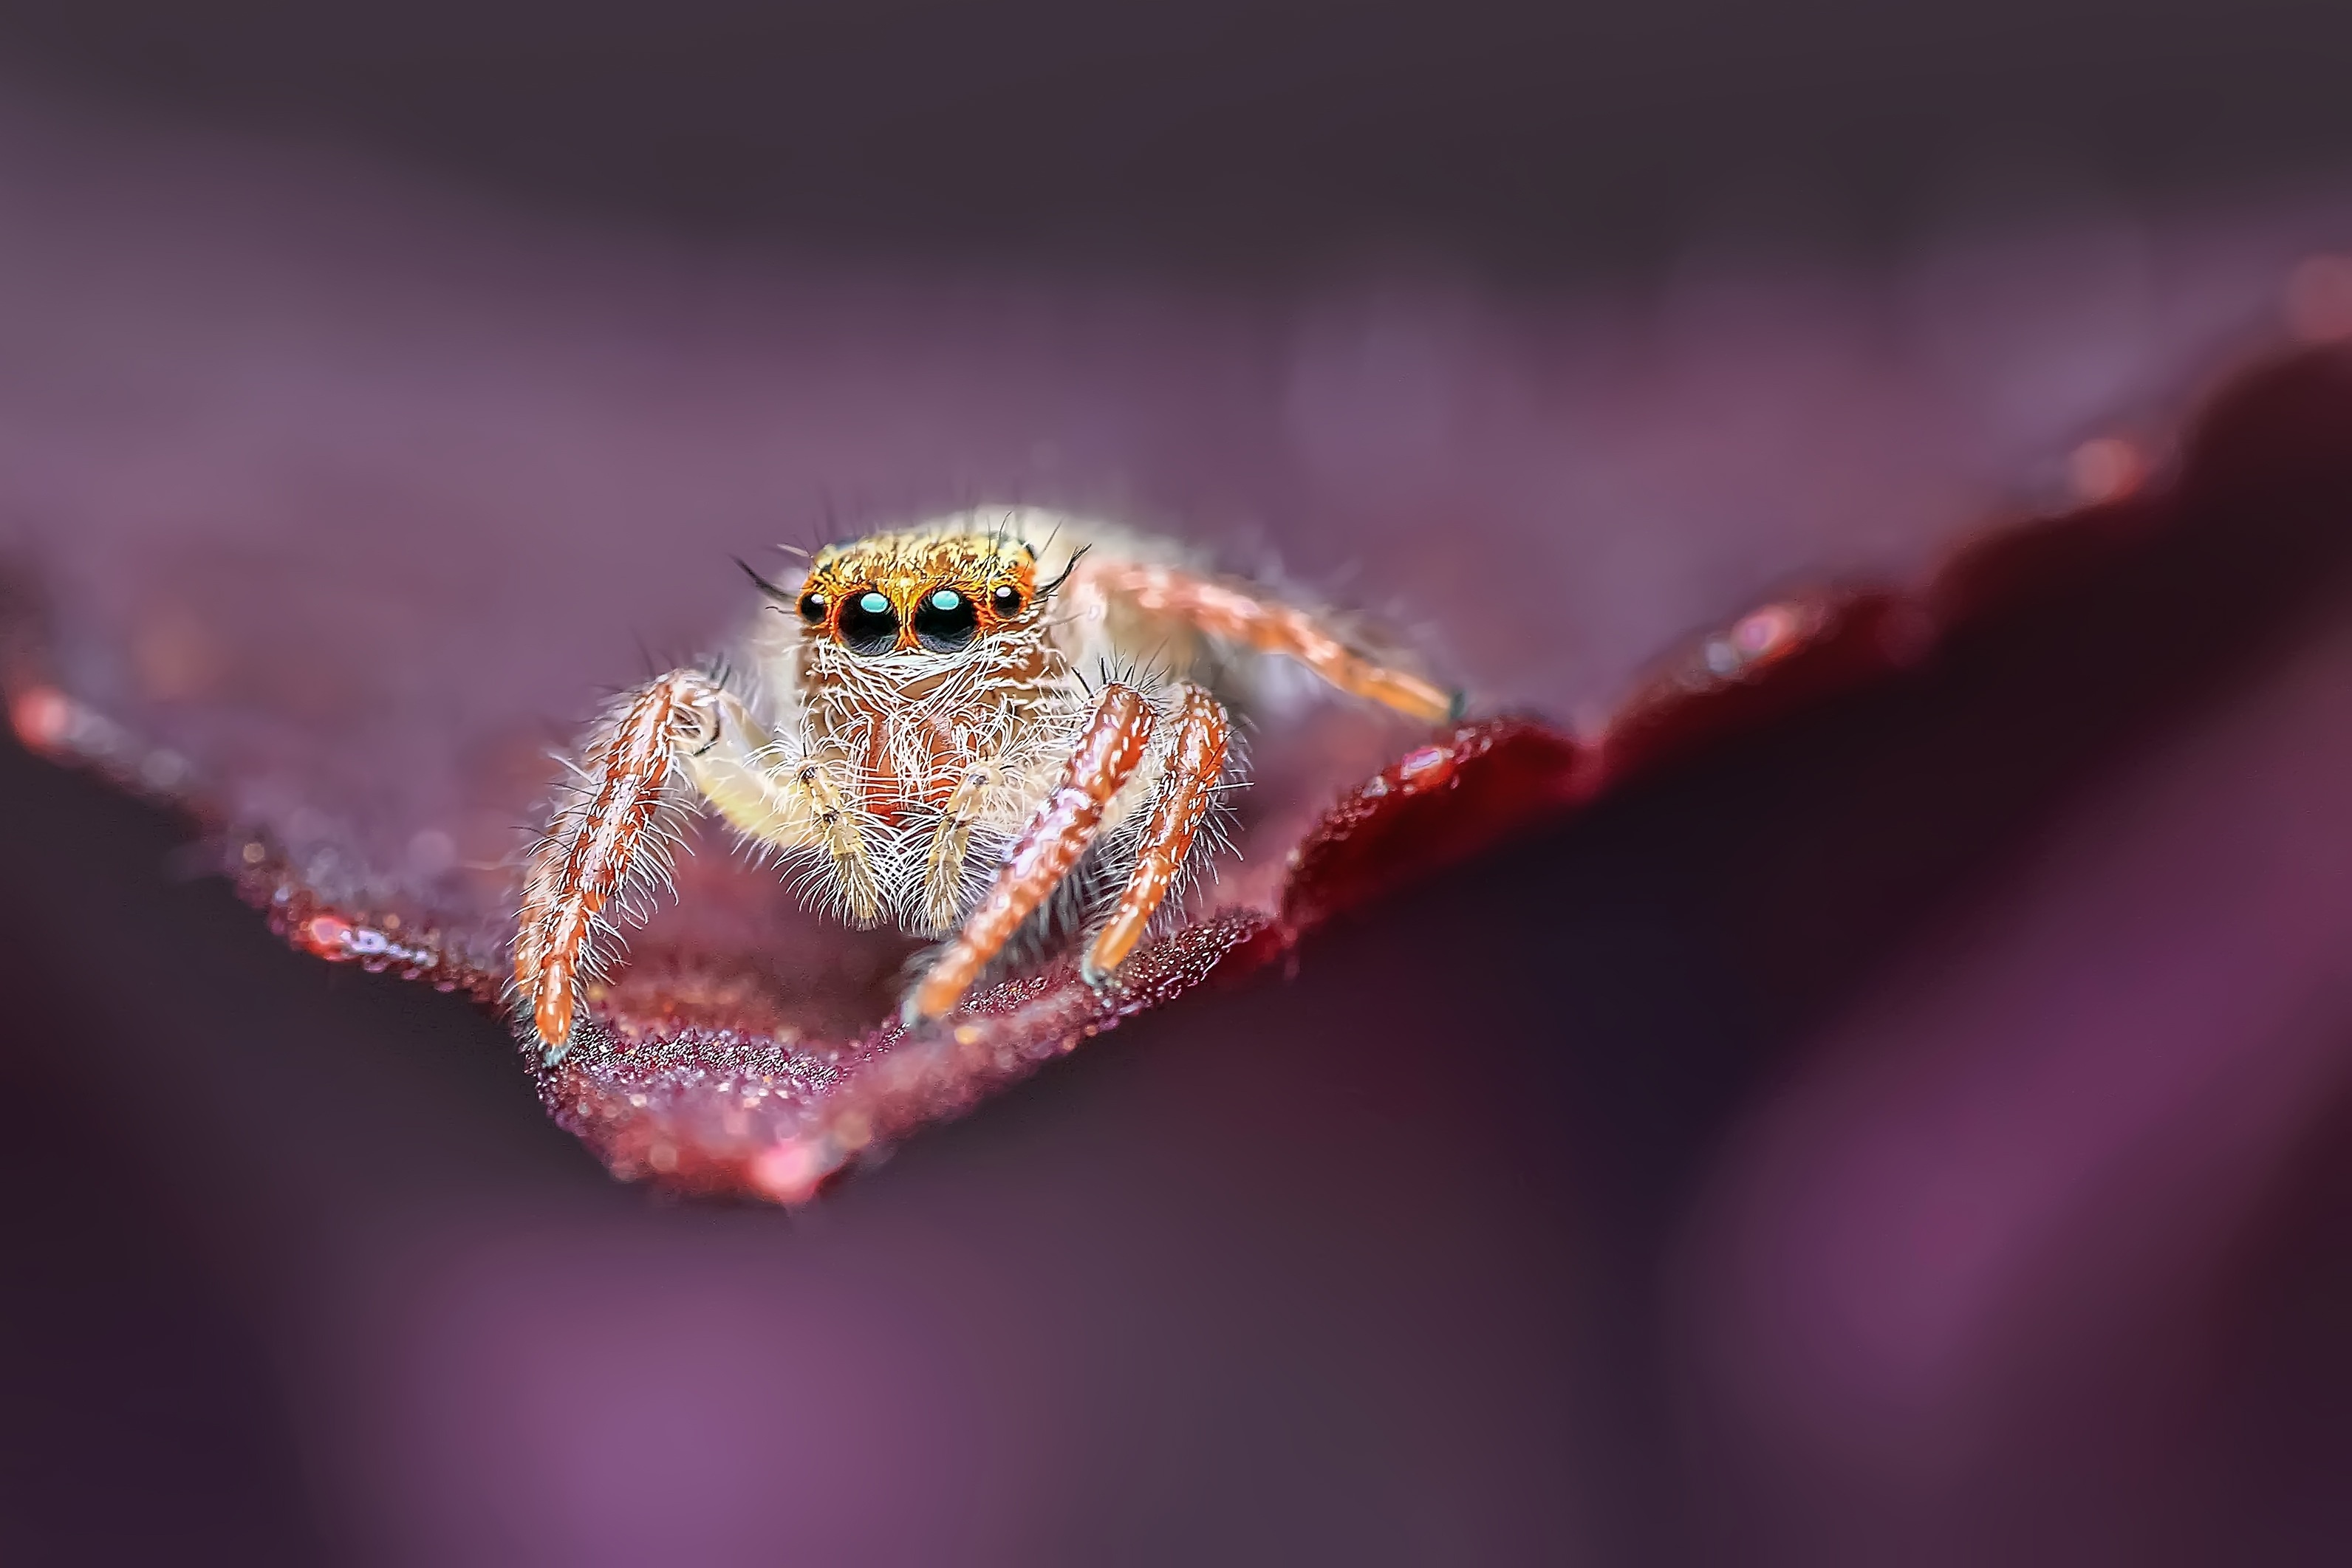 Jumping spider wallpaper, Animal insect, Free download, Up-close shot, 3190x2130 HD Desktop